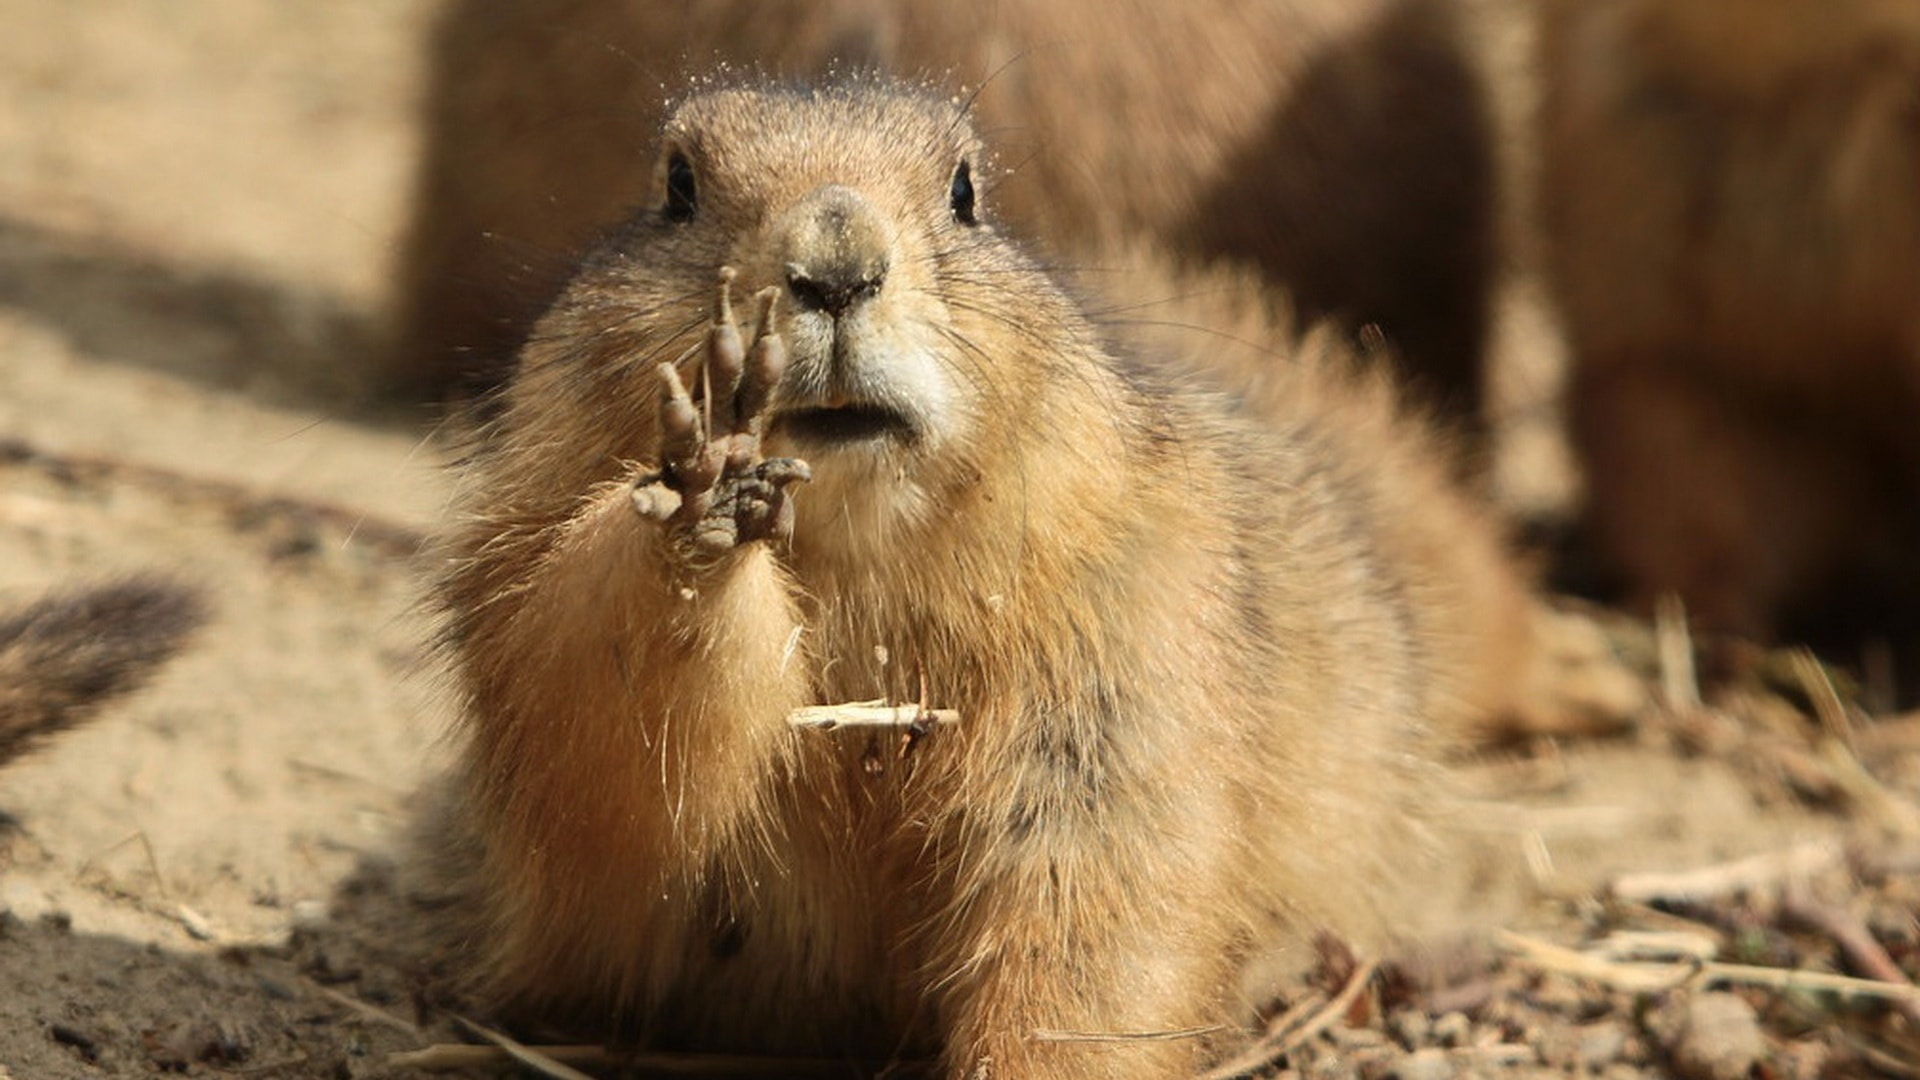 Marmot Wallpapers and Background Images - stmed.net